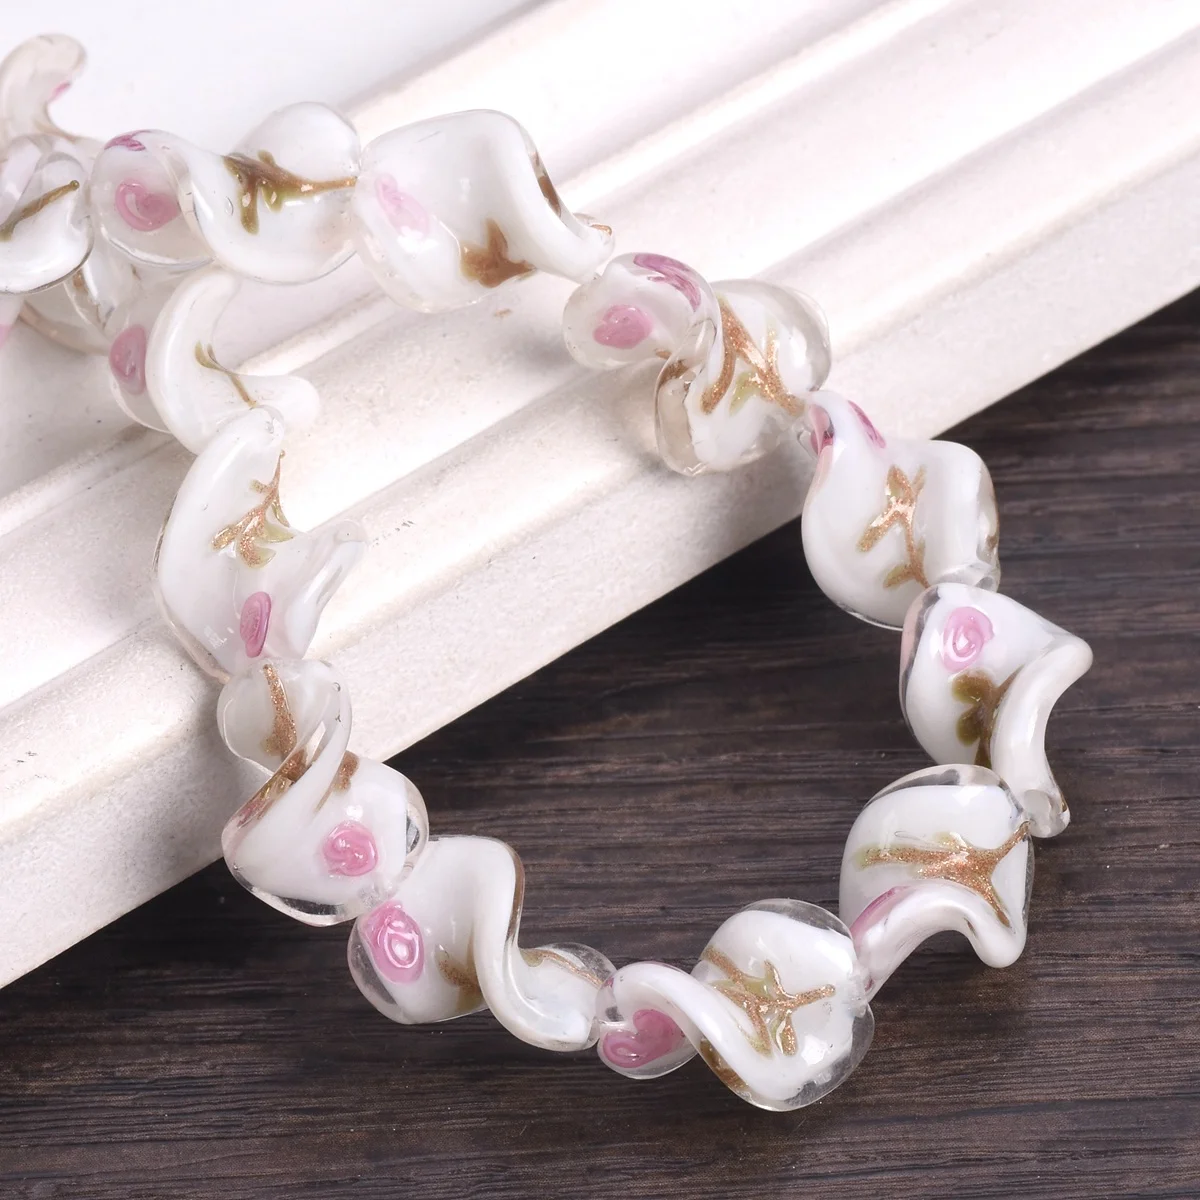 10pcs Twist Shape 18x13mm Handmade Flower Lampwork Glass Loose Crafts Beads For Jewelry Making DIY Earring Findings customized product、modern display mirror metal furniture used plywood tray glass kiosk tower counter jewelry showcase cabinet fo